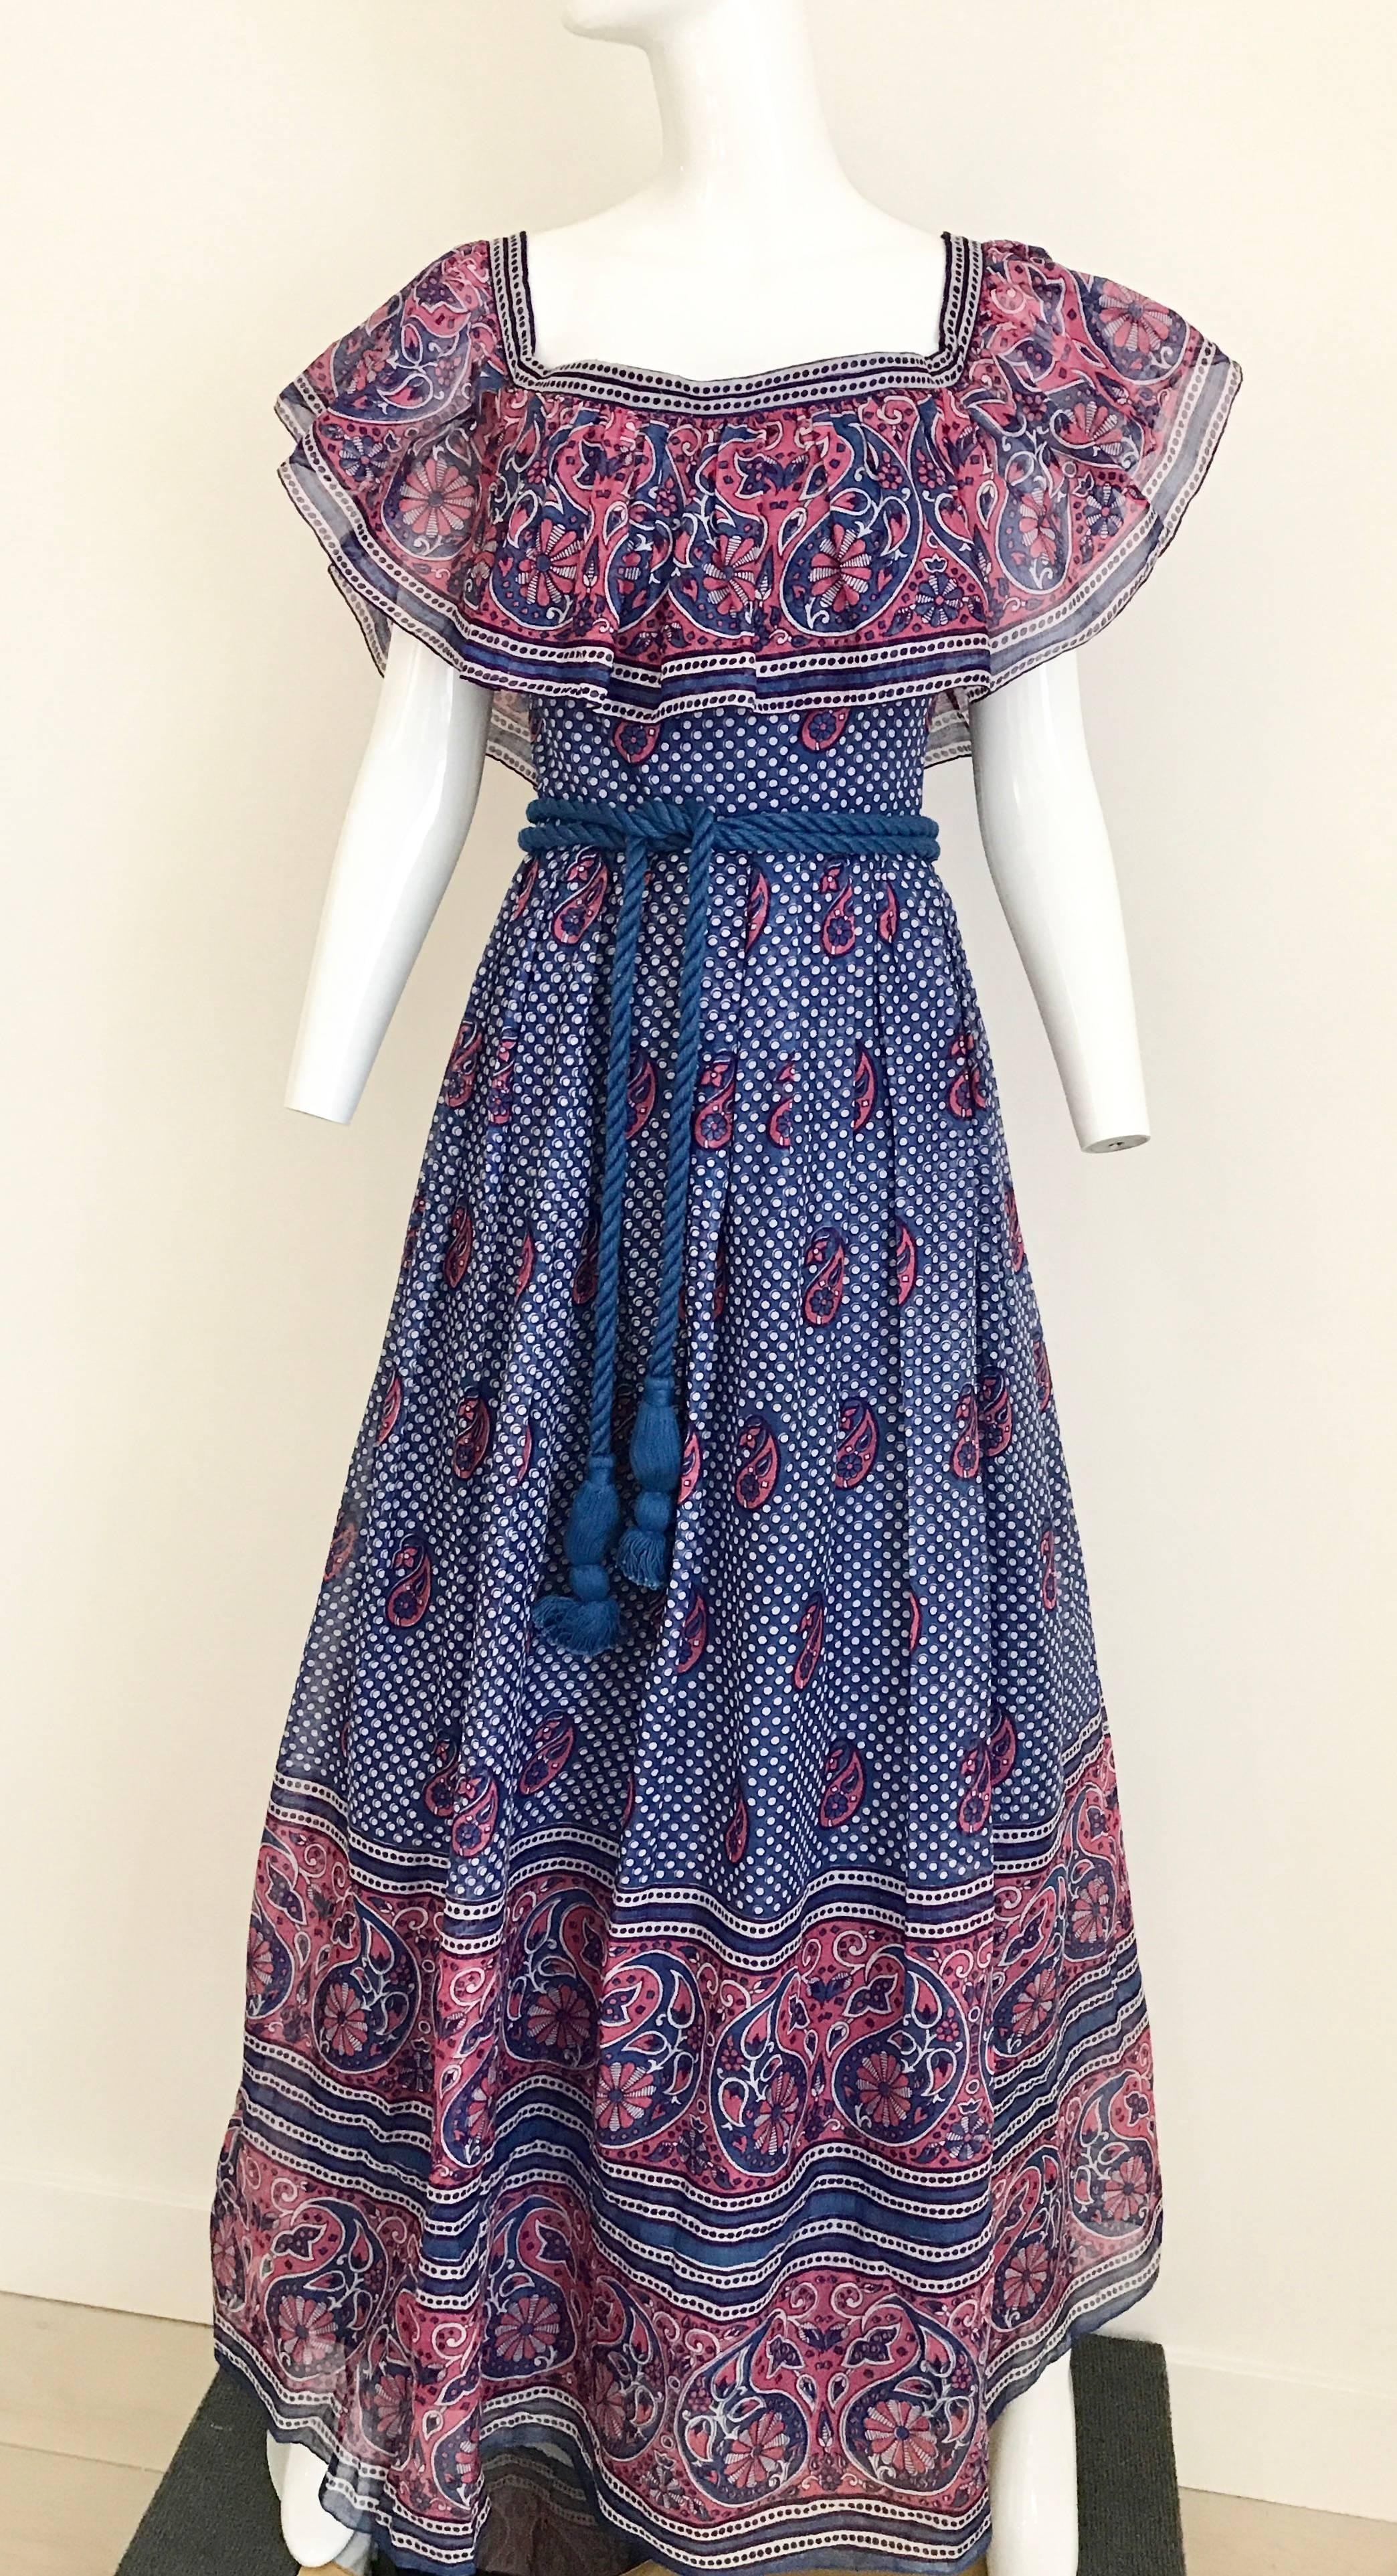 Vintage 1970s cotton, off shoulder blue and pink paisley Indian print maxi dress is a perfect summer vacation dress. Dress comes with a thick blue rope belt. The dress can be worn off shoulder (peasant style) or on the shoulder.
Measurement: 
Bust: